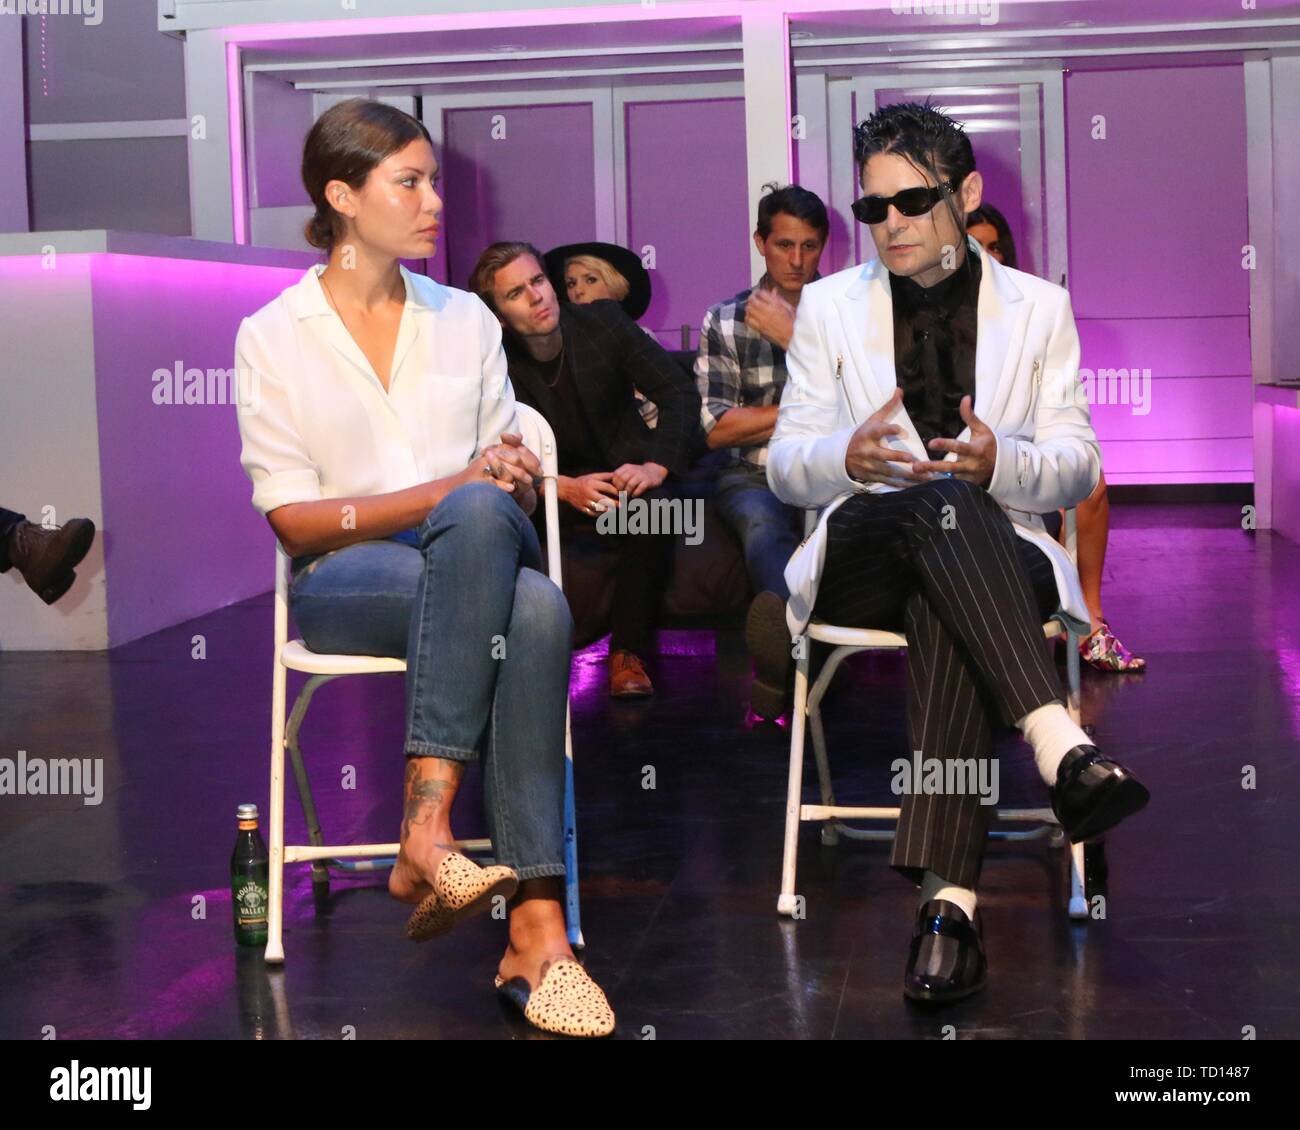 West Hollywood, CA. 9th June, 2019. Dawn Dunning, Corey Feldman in attendance for FAMOUS Opening Night, The 11:11 Experience, West Hollywood, CA June 9, 2019. Credit: Priscilla Grant/Everett Collection/Alamy Live News Stock Photo